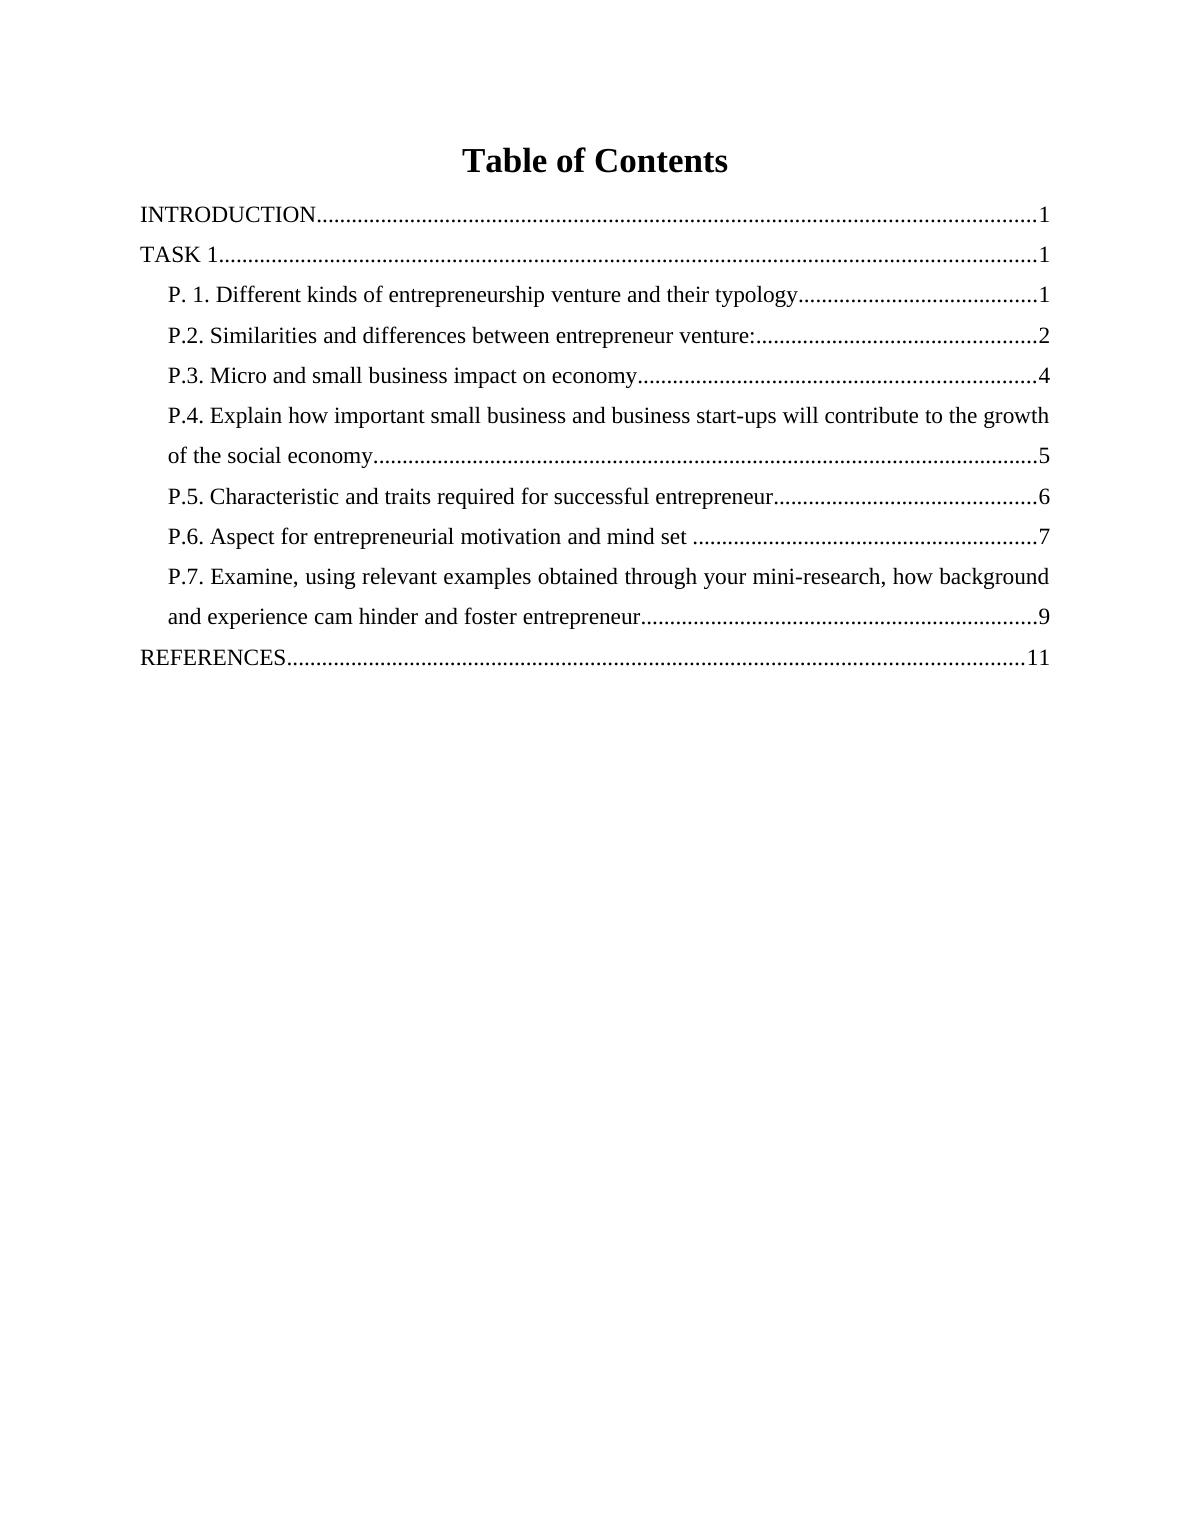 Entrepreneurship and Small Business Management Project Report_2